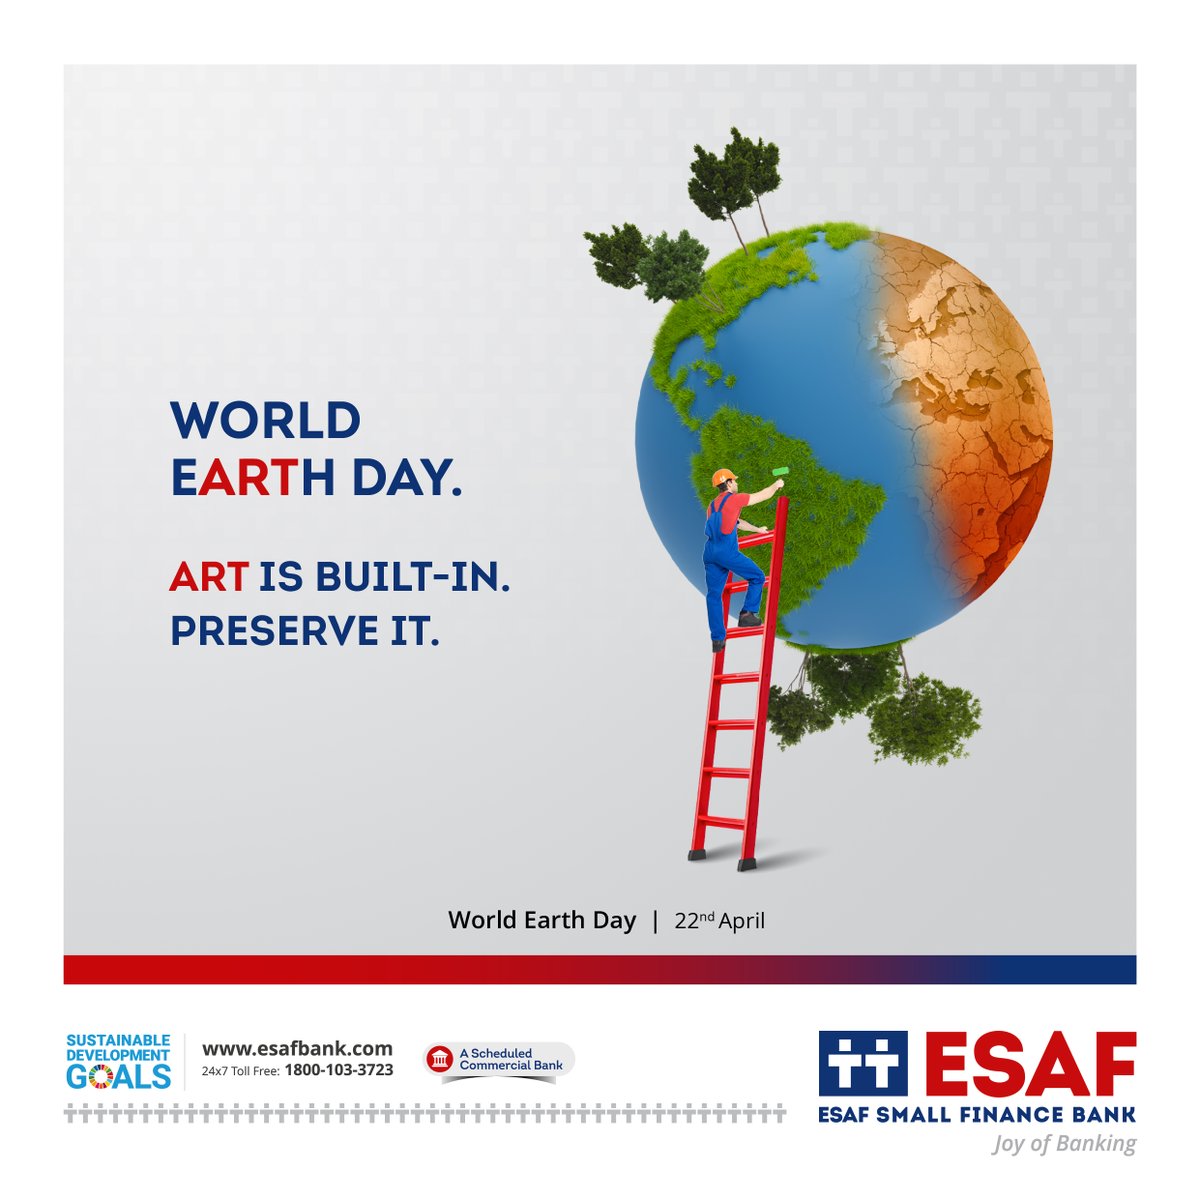 Art is inherent to our planet.
Let’s preserve it for generations to come. Happy Earth Day.

#HappyEarthDay #PreserveOurPlanet #SustainableFuture #ArtInNature #ESAFBank #JoyOfBanking #thepowertodreambigger